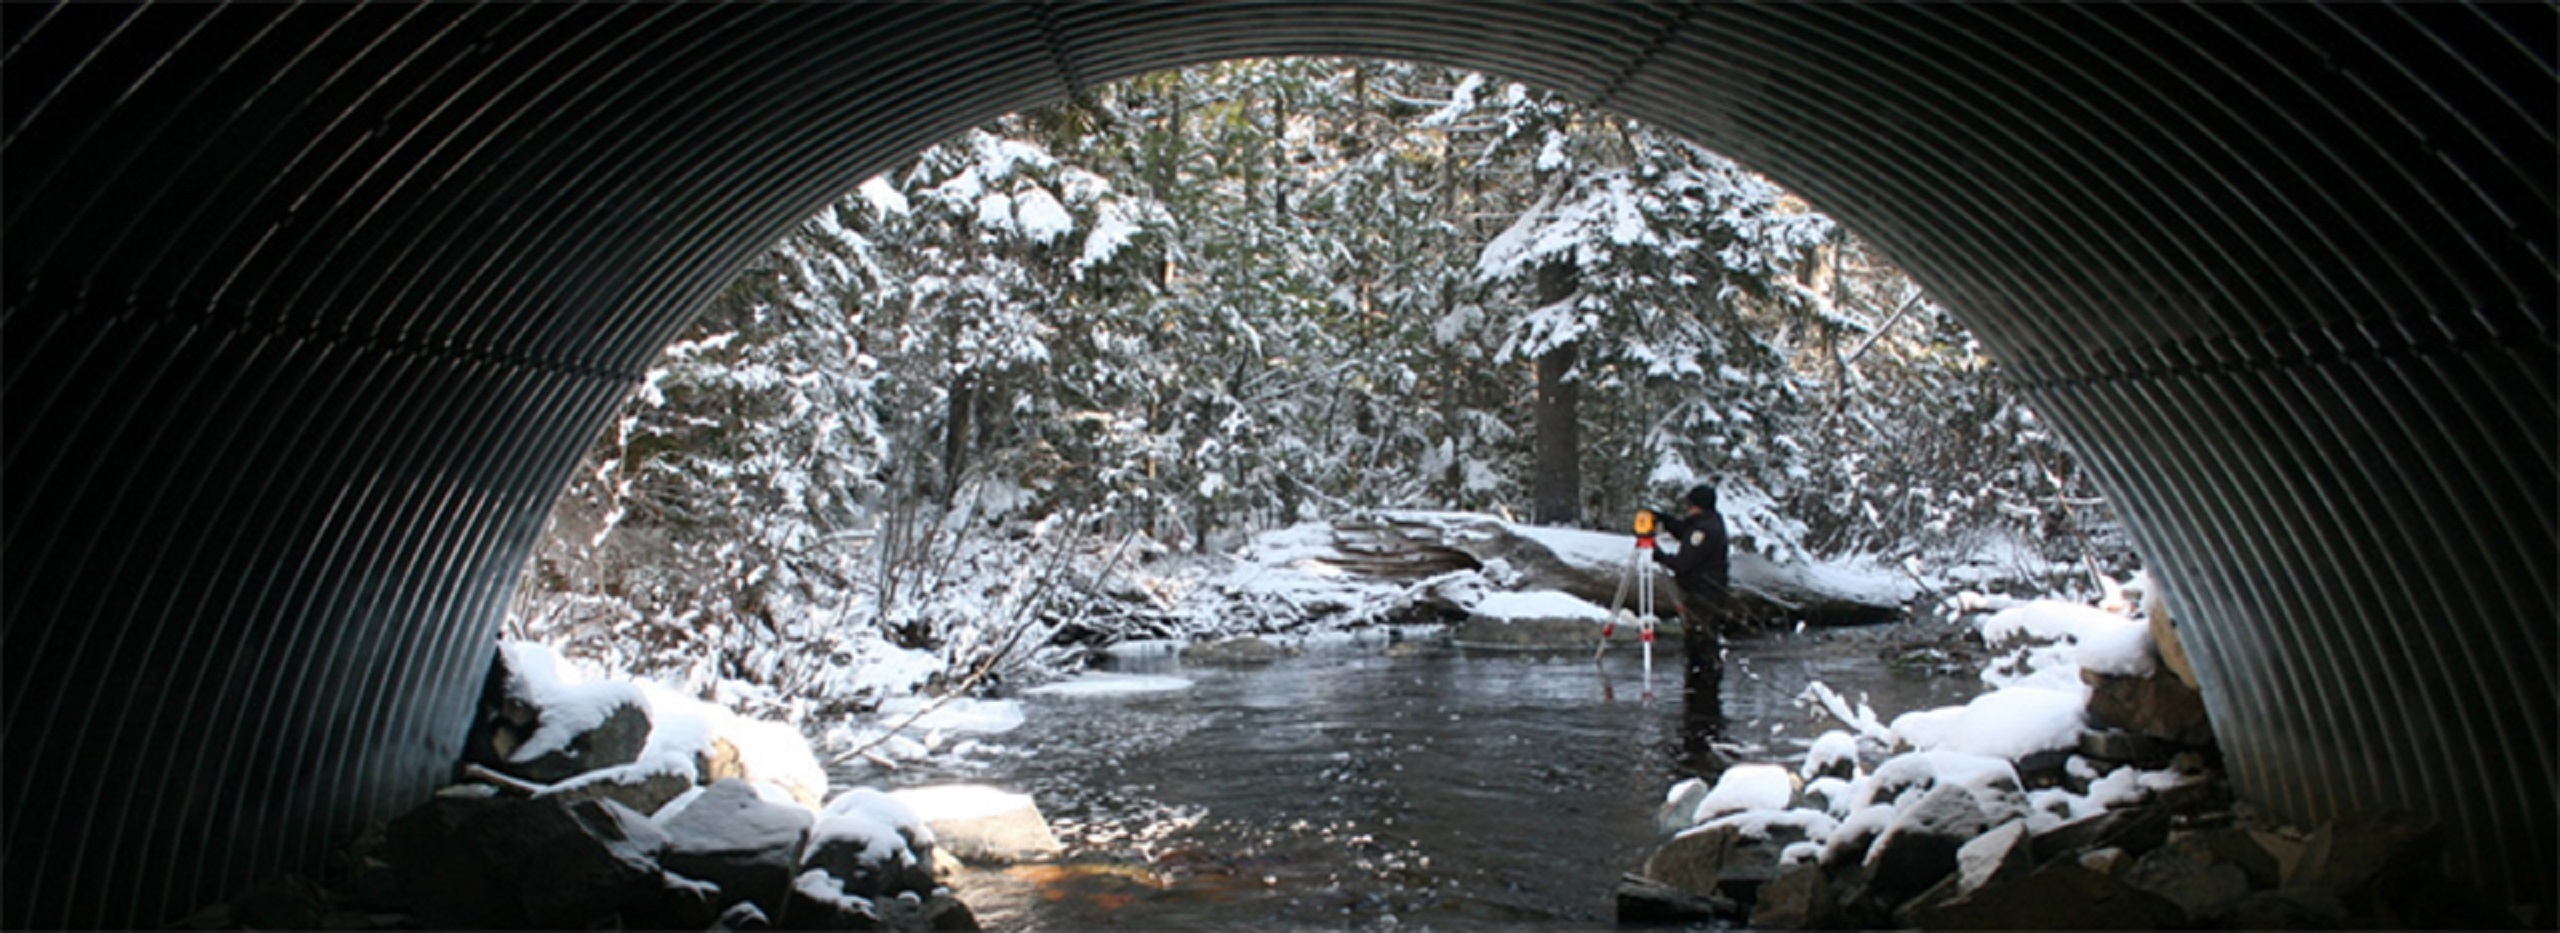 Open arch culverts restore natural stream function and fish passage